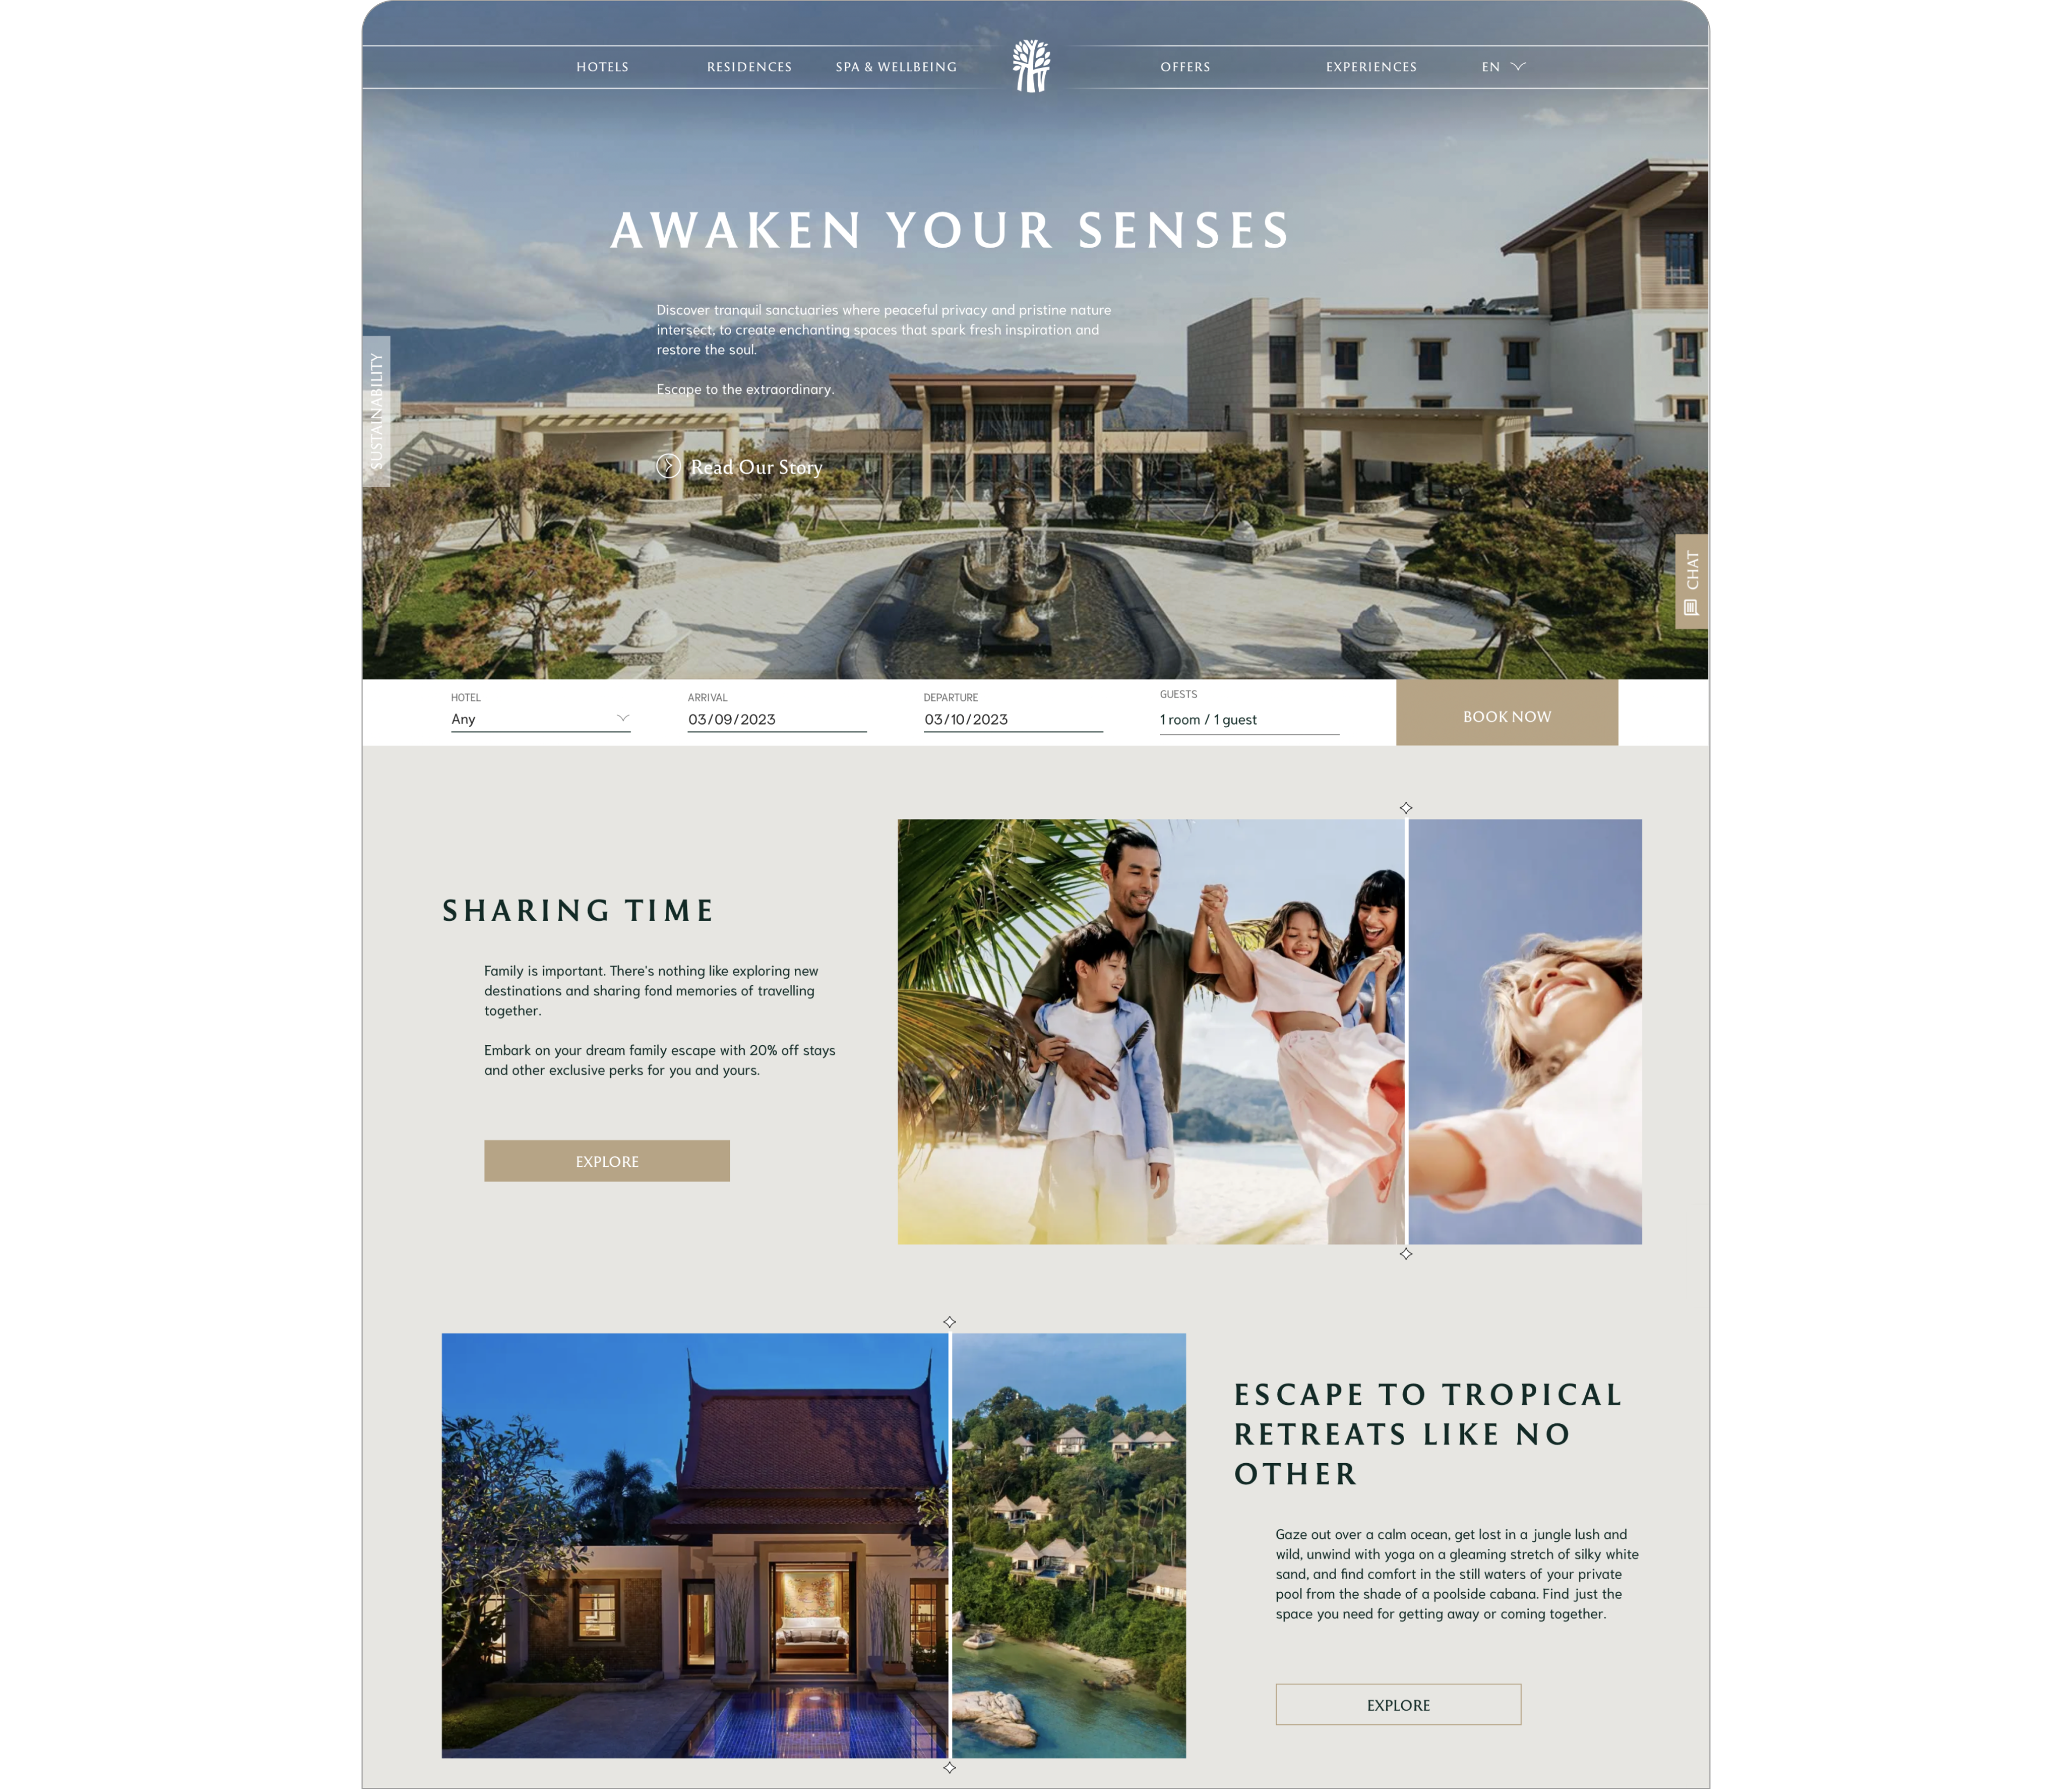 IT Consultis helped revamp the Banyan Tree website design